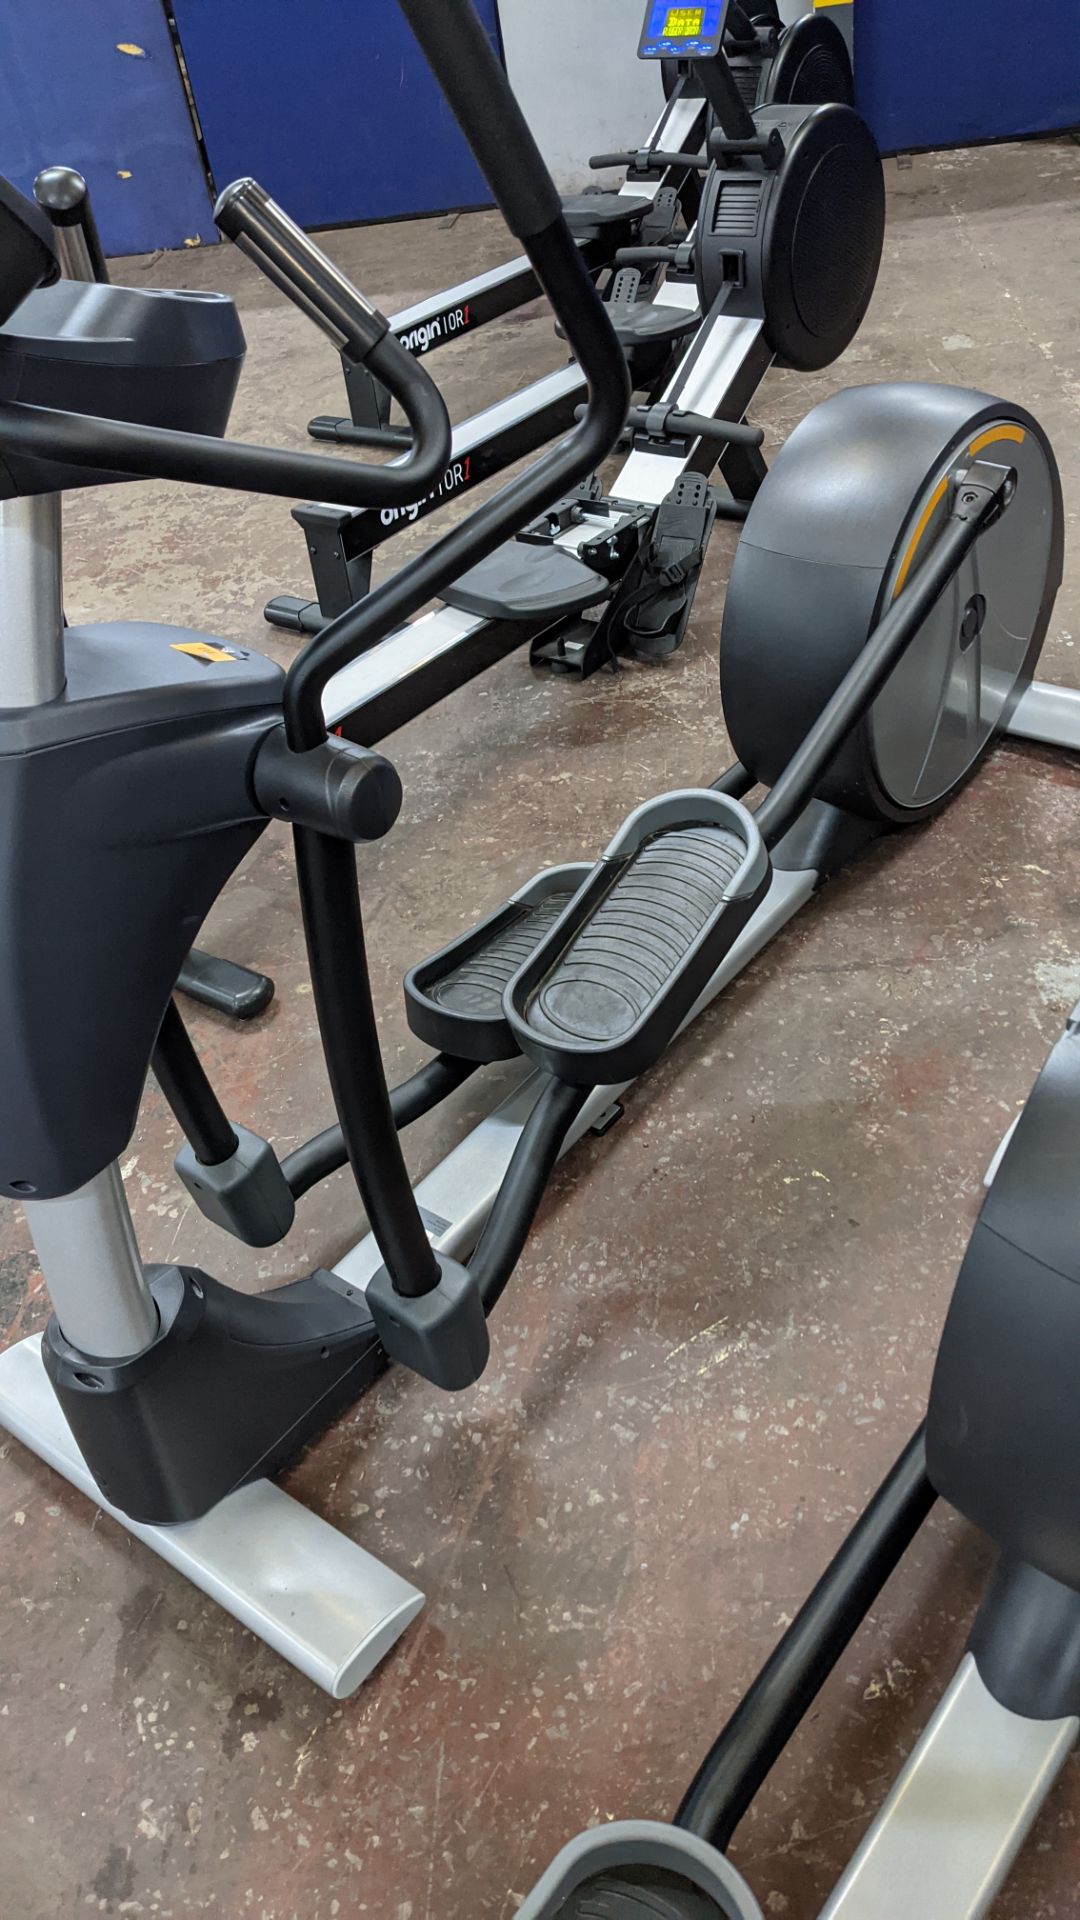 Impulse model RE500 Elliptical Cross Trainer. 21" stride length, 7" step on height. LED display cons - Image 6 of 13